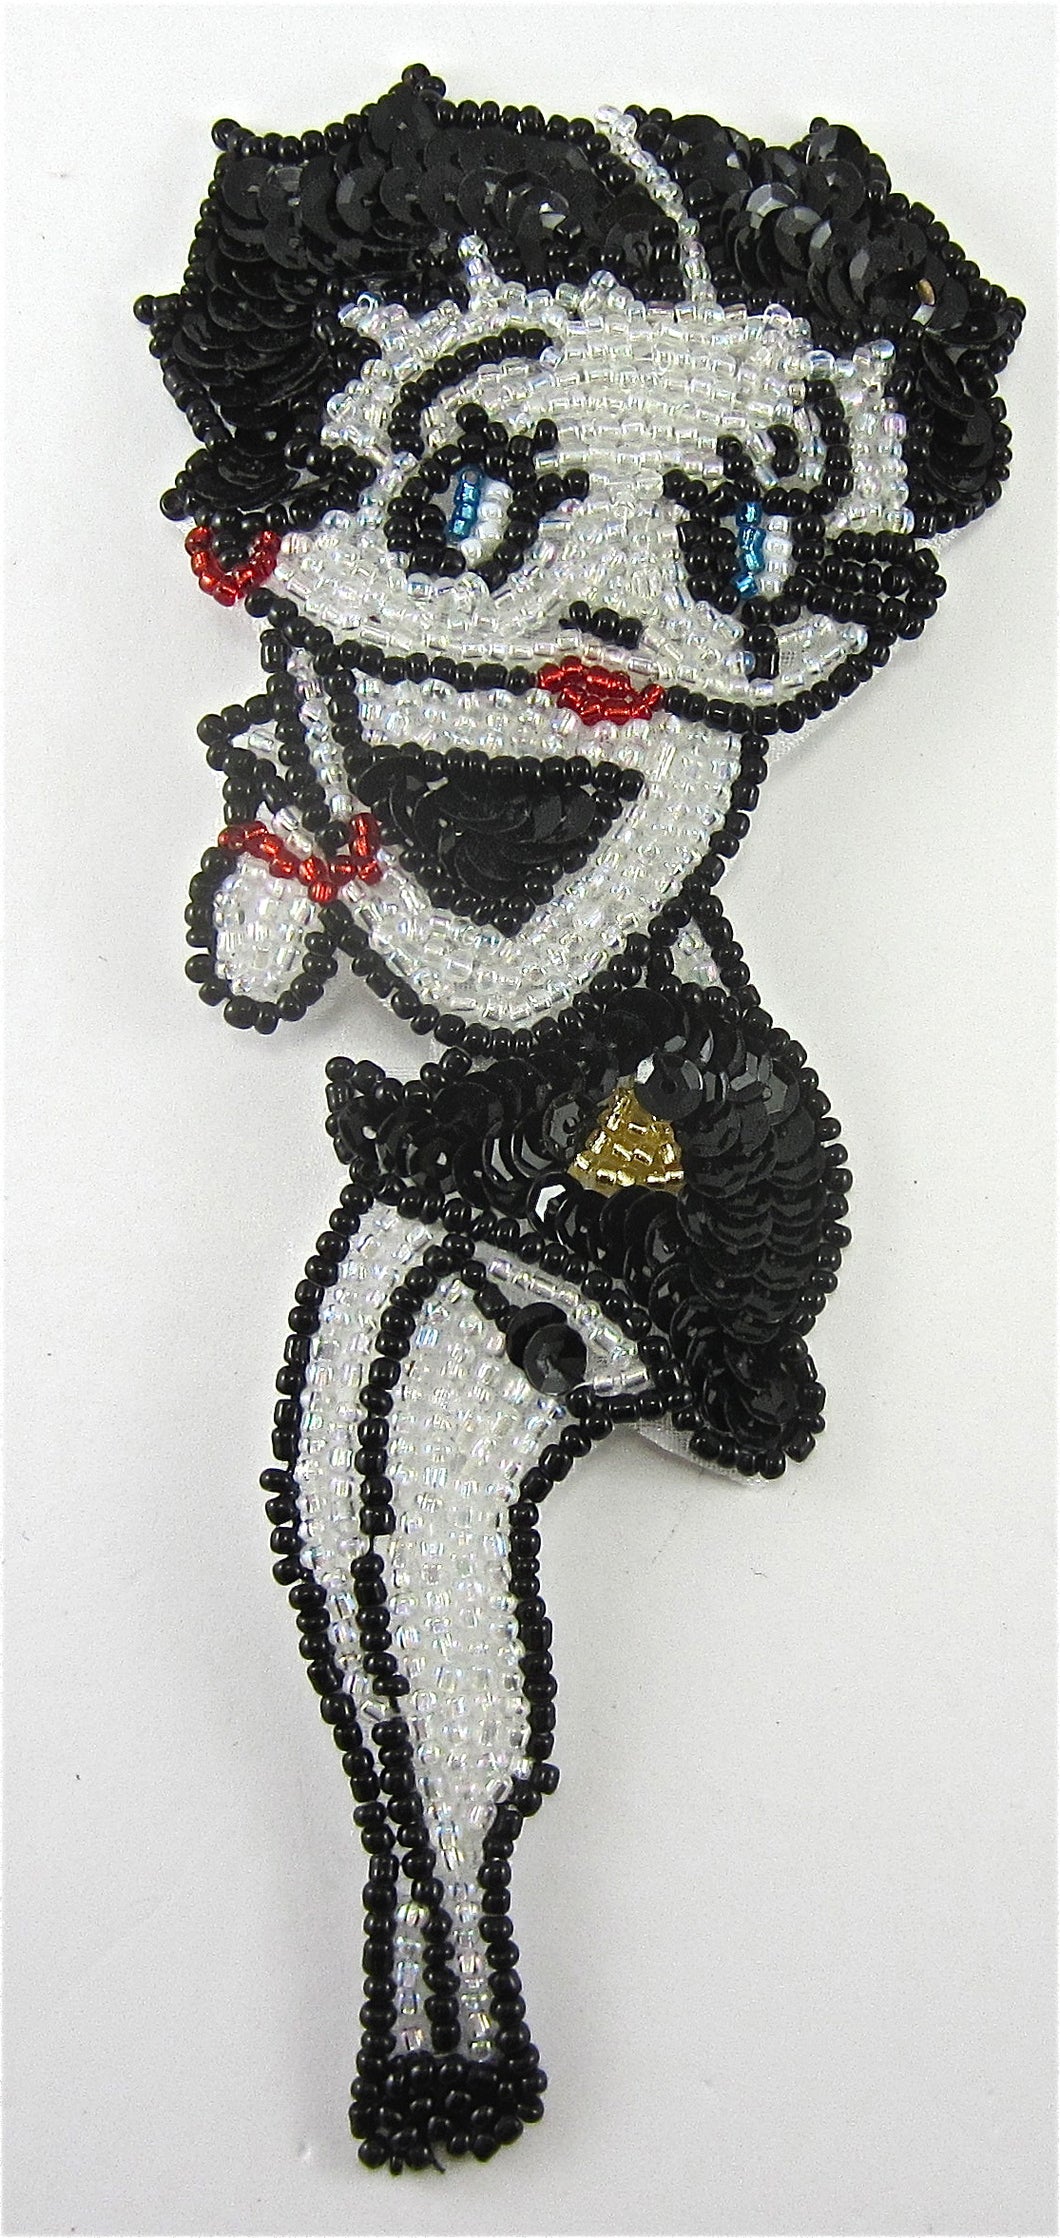 Betty Boop Red Lips earrings and bracelet Beads and Sequins 6.5